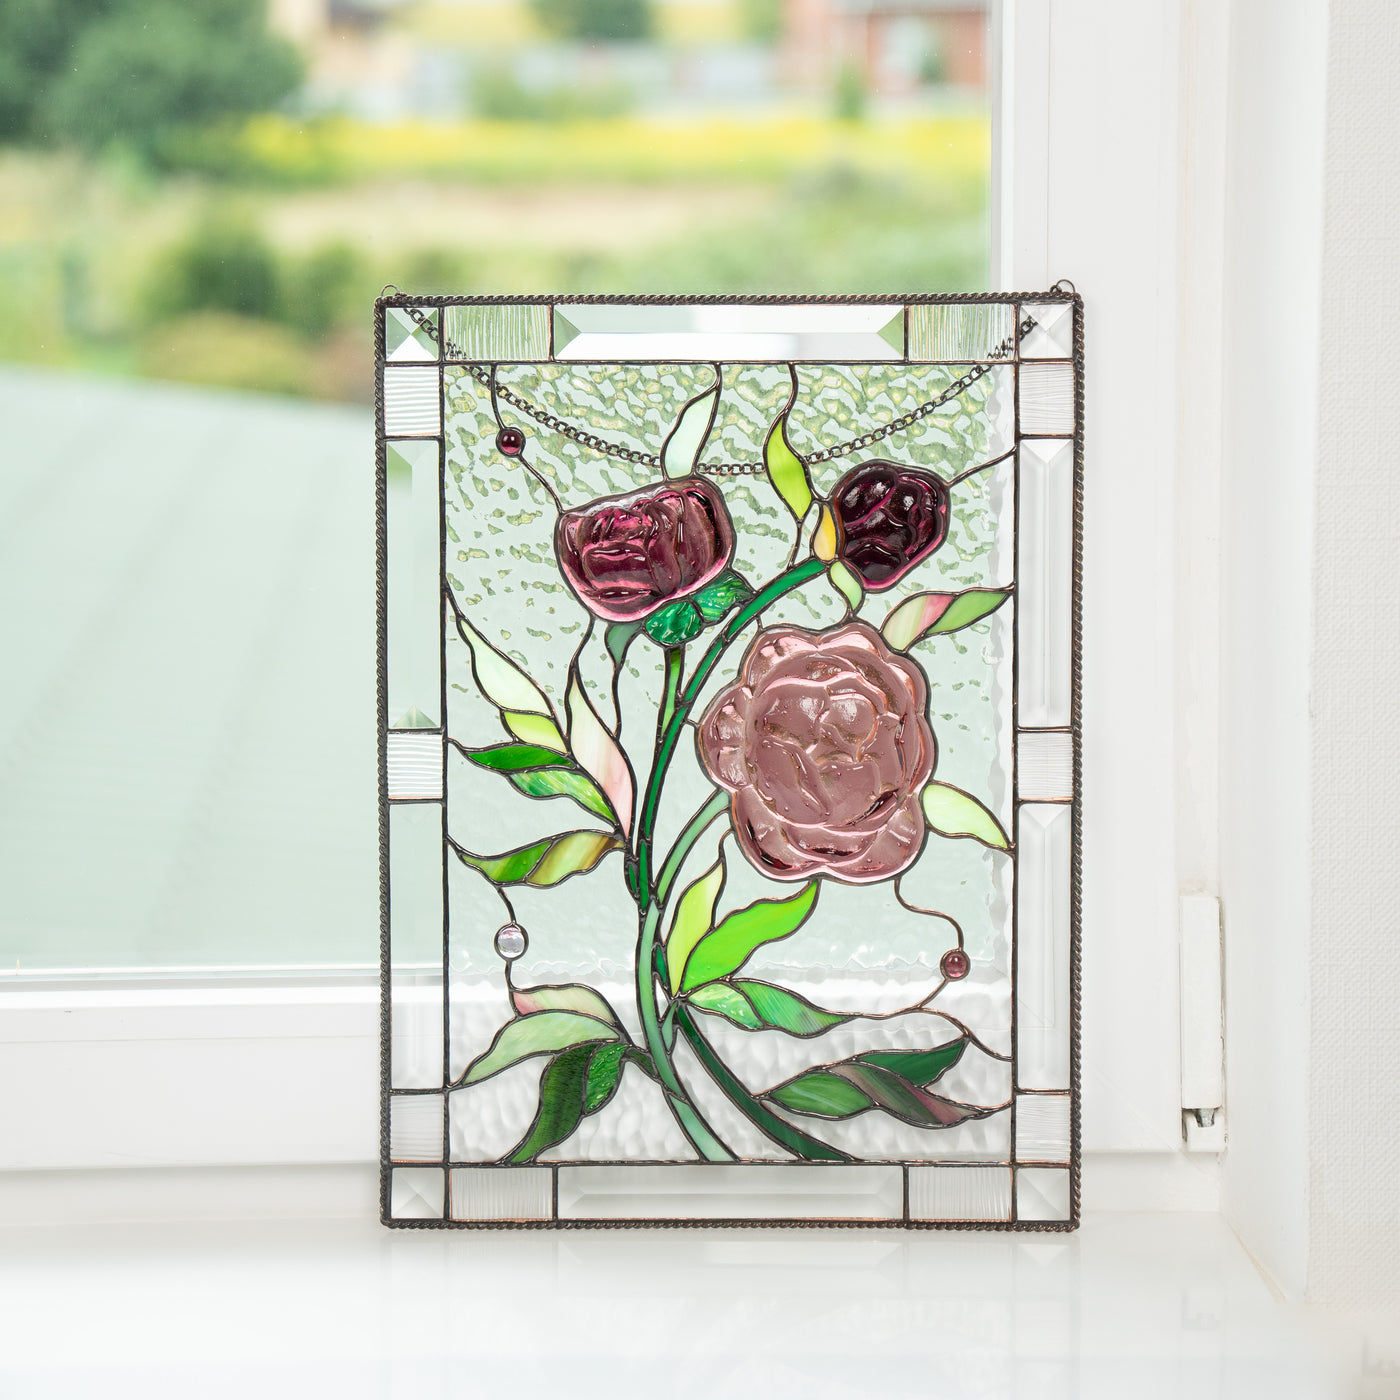 Stained glass window hanging depicting three peonies